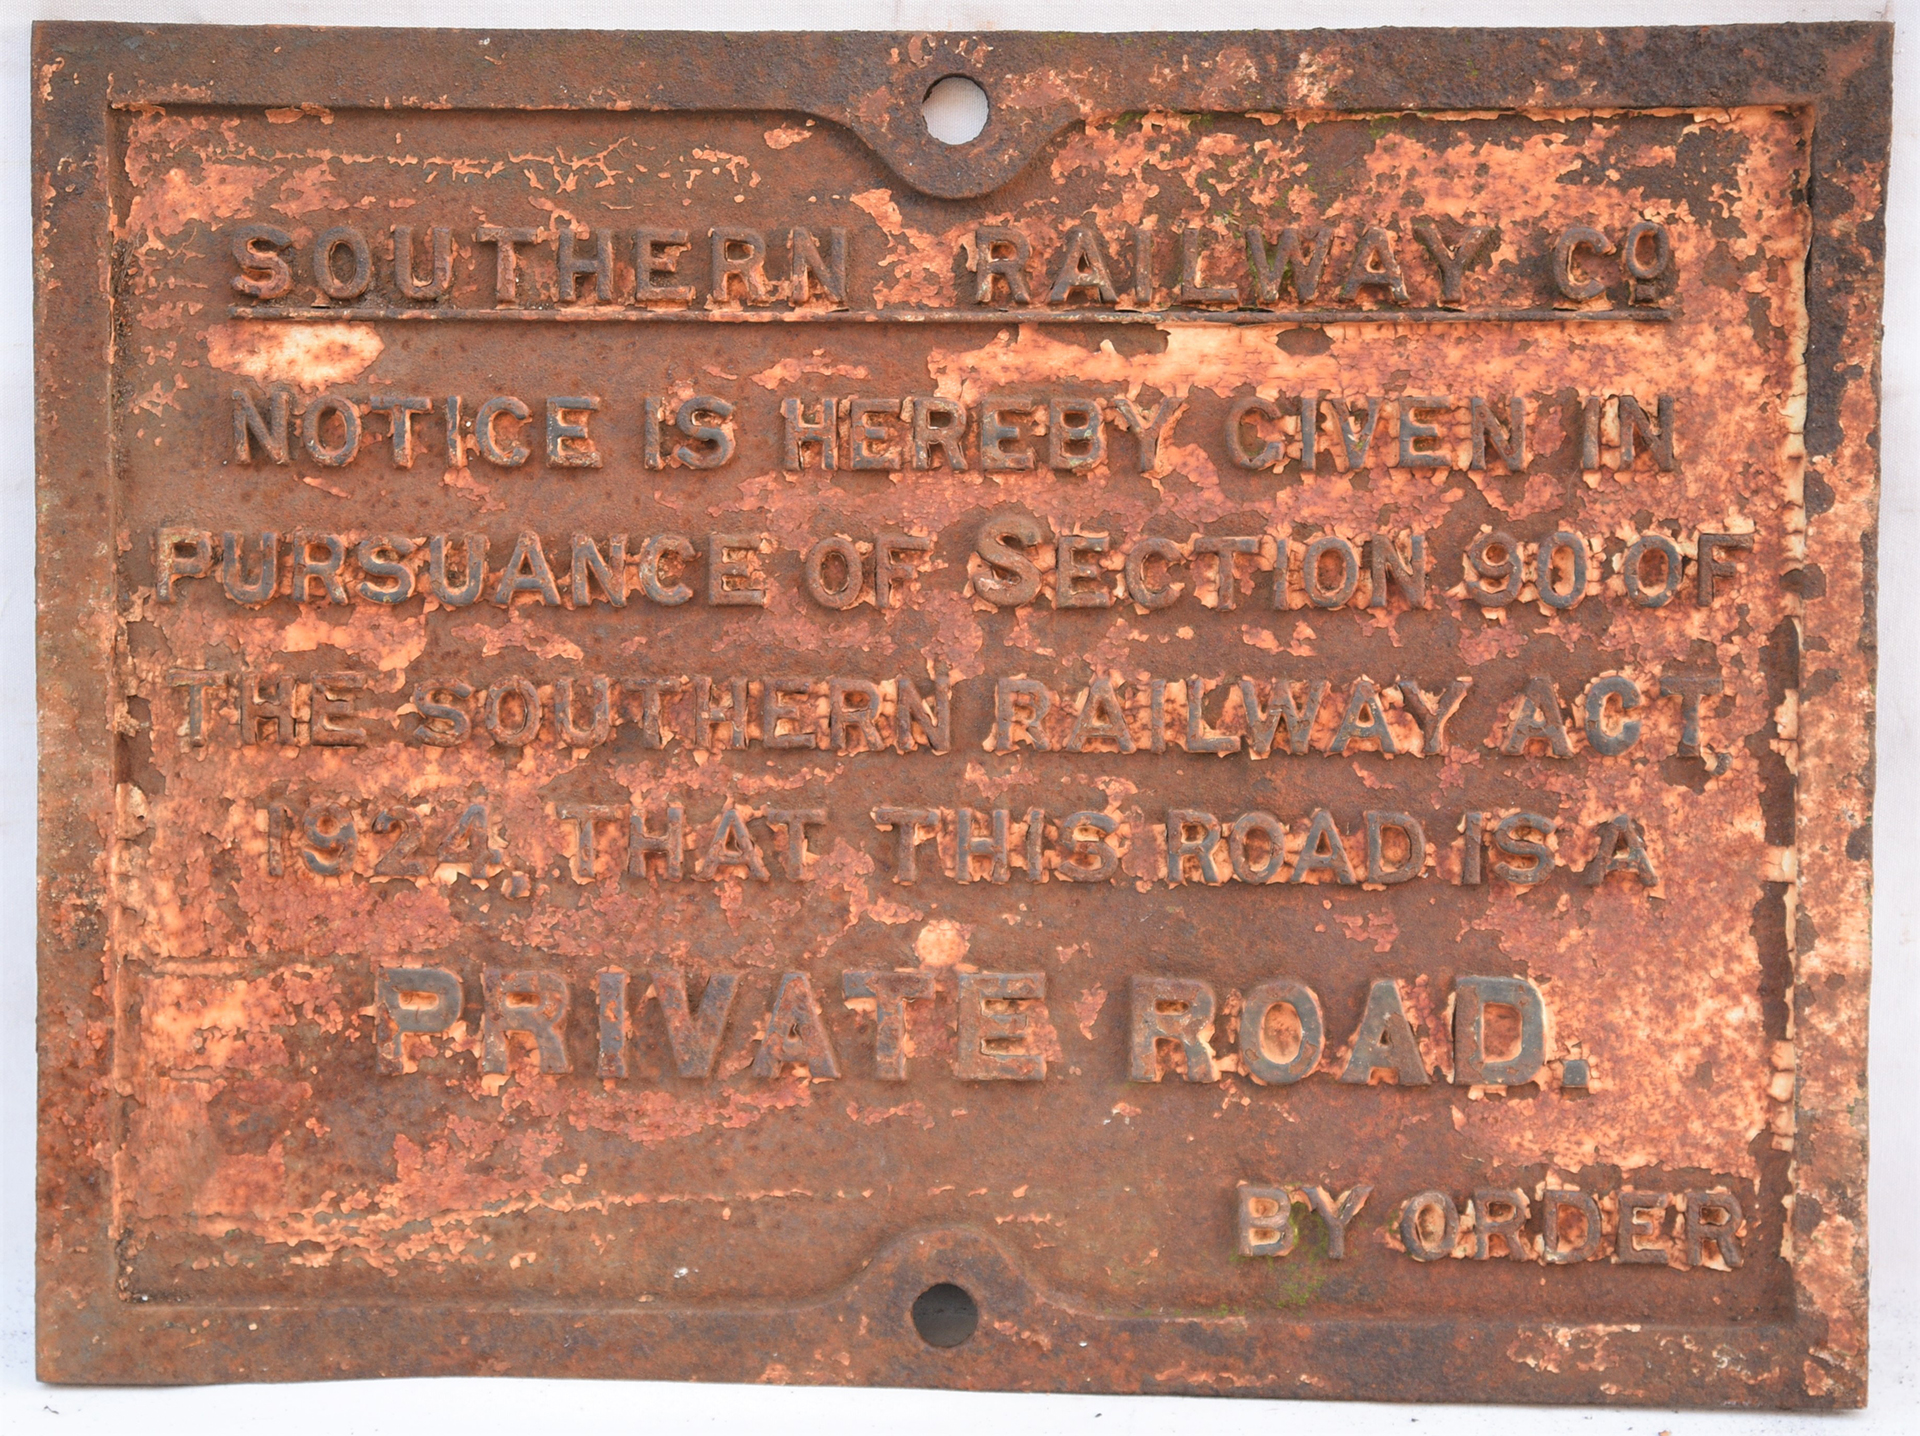 Southern Railway cast iron sign. PRIVATE ROAD. In original condition devoid of paint. Measuring 25in